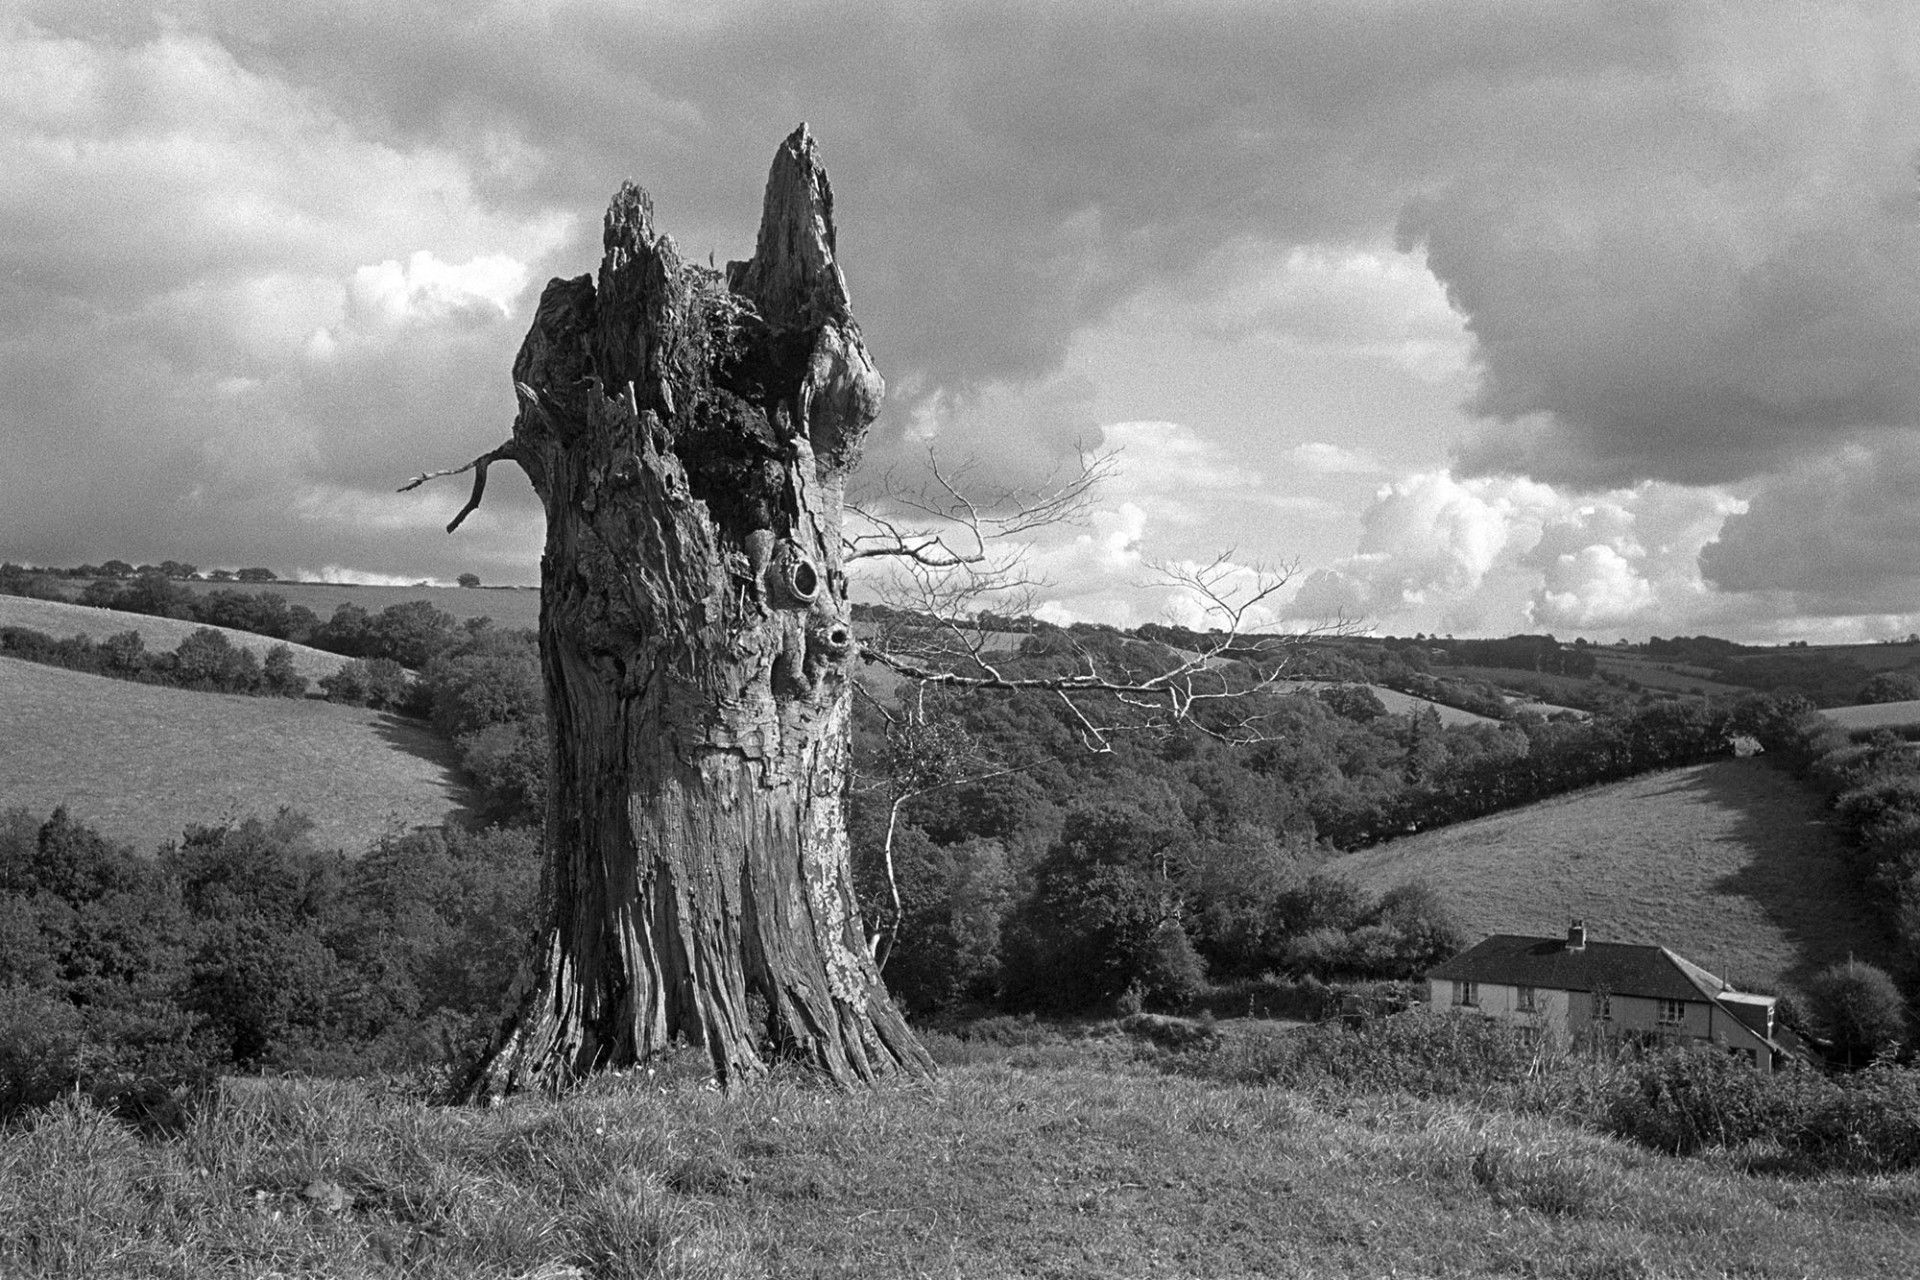 Trunk of old beech tree in clouded landscape. 
[The trunk of a dead beech or oak tree in a field at Spittle, Chulmleigh. A landscape with fields, trees, a farmhouse and clouds is in the background.]